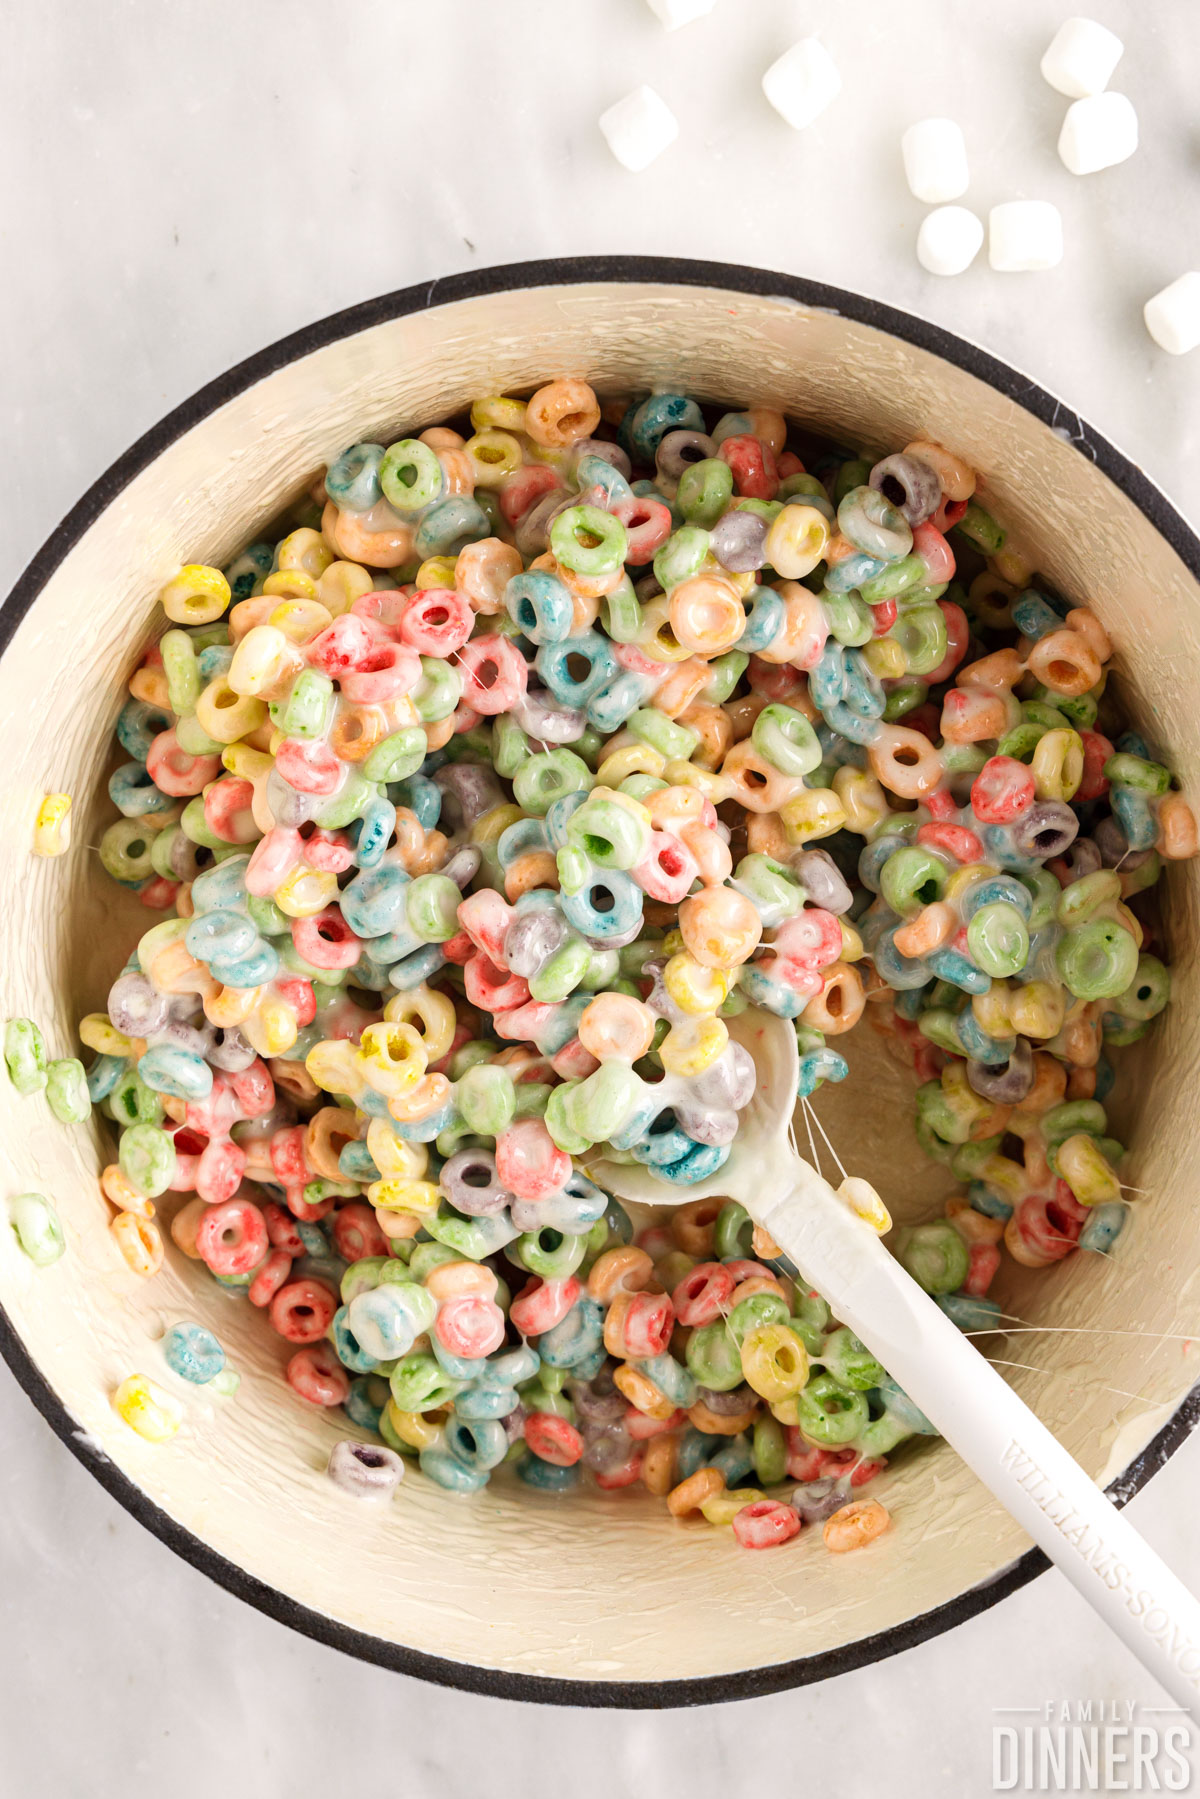 Fruit loops and marshmallows mixed in a pot.